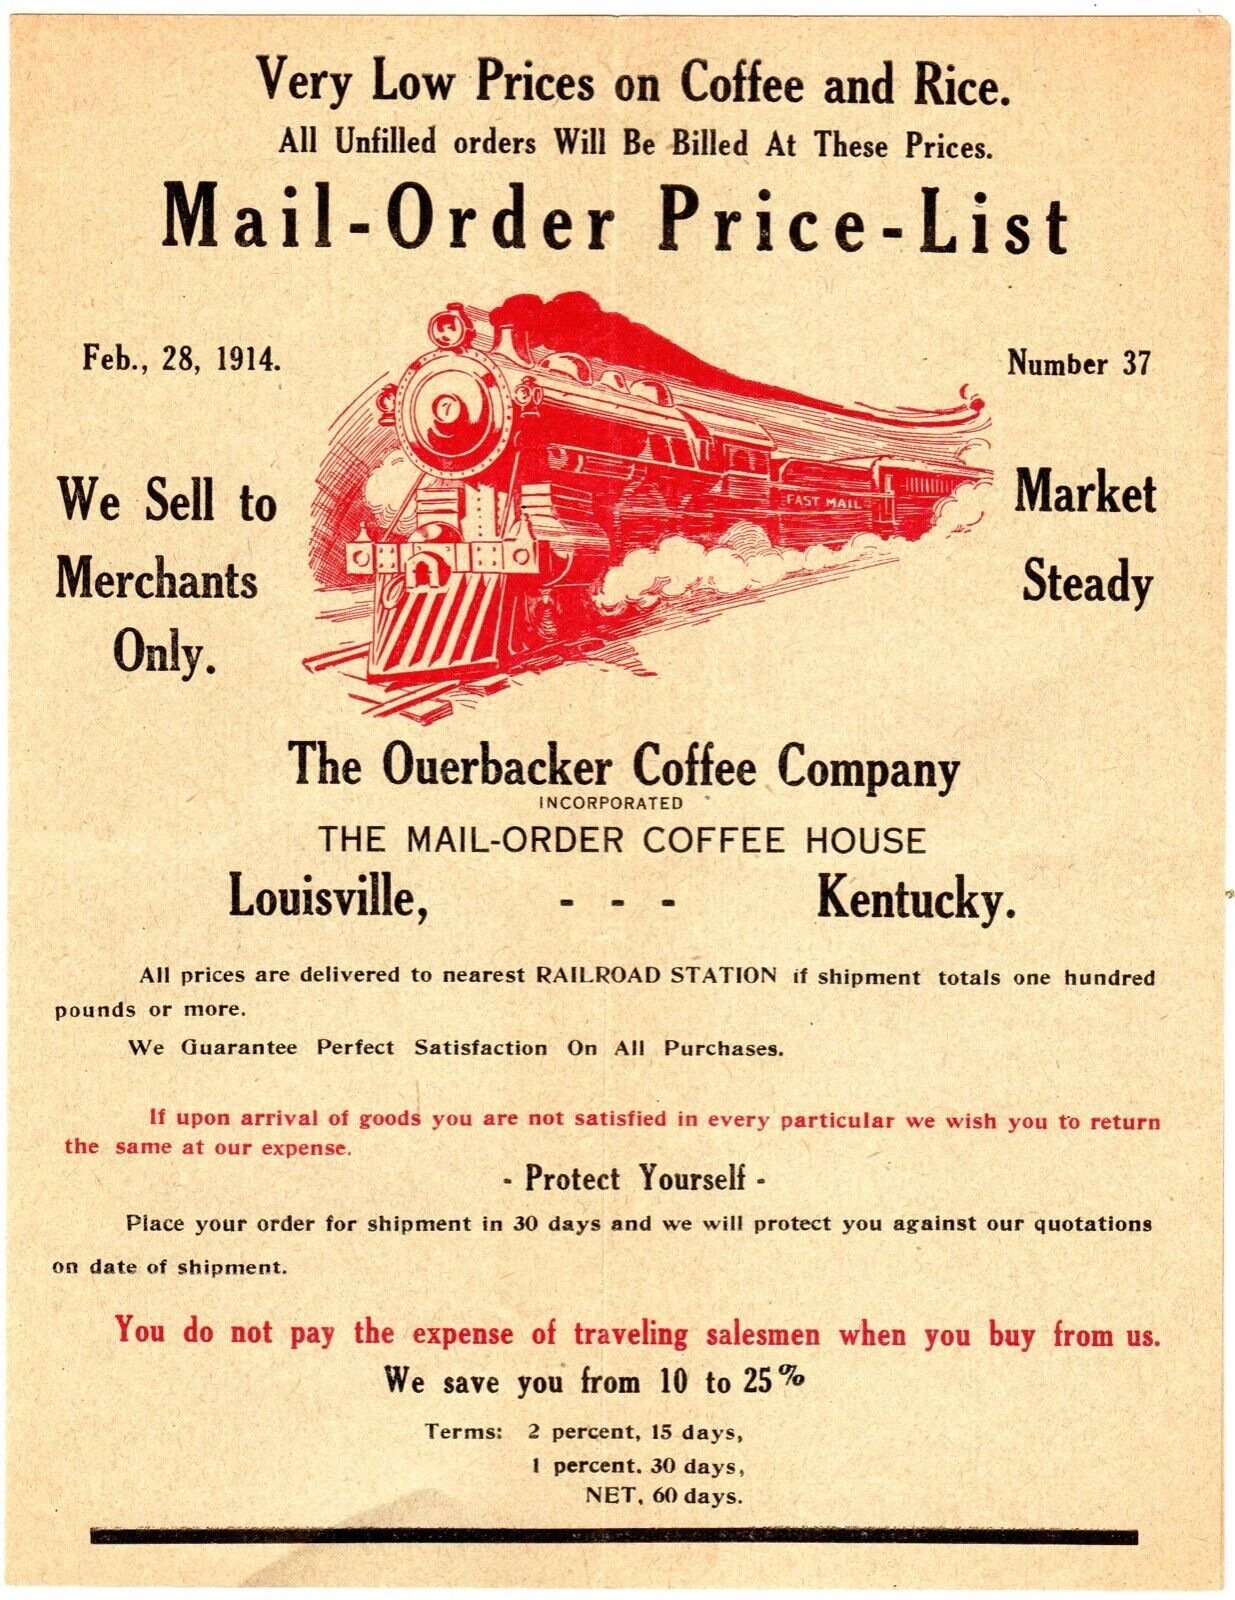 Ouerbacker Coffee Co Mail Order Coffee House Catalog 1914 Louisville KY LOOK@@